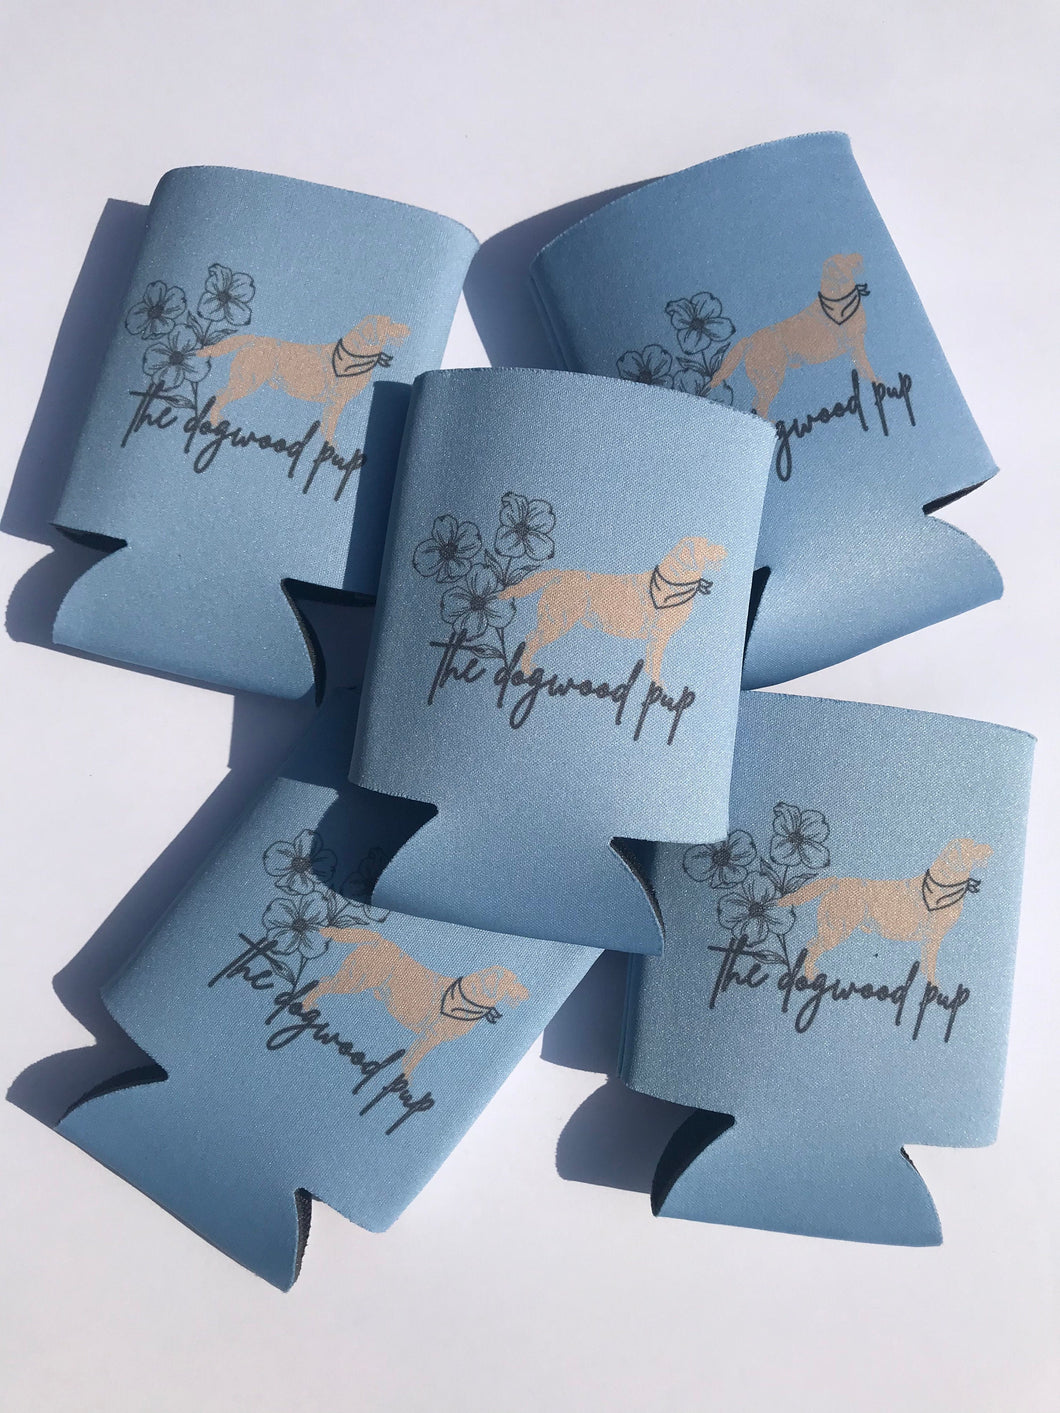 The Dogwood Pup Koozies/Can Coolers - blue